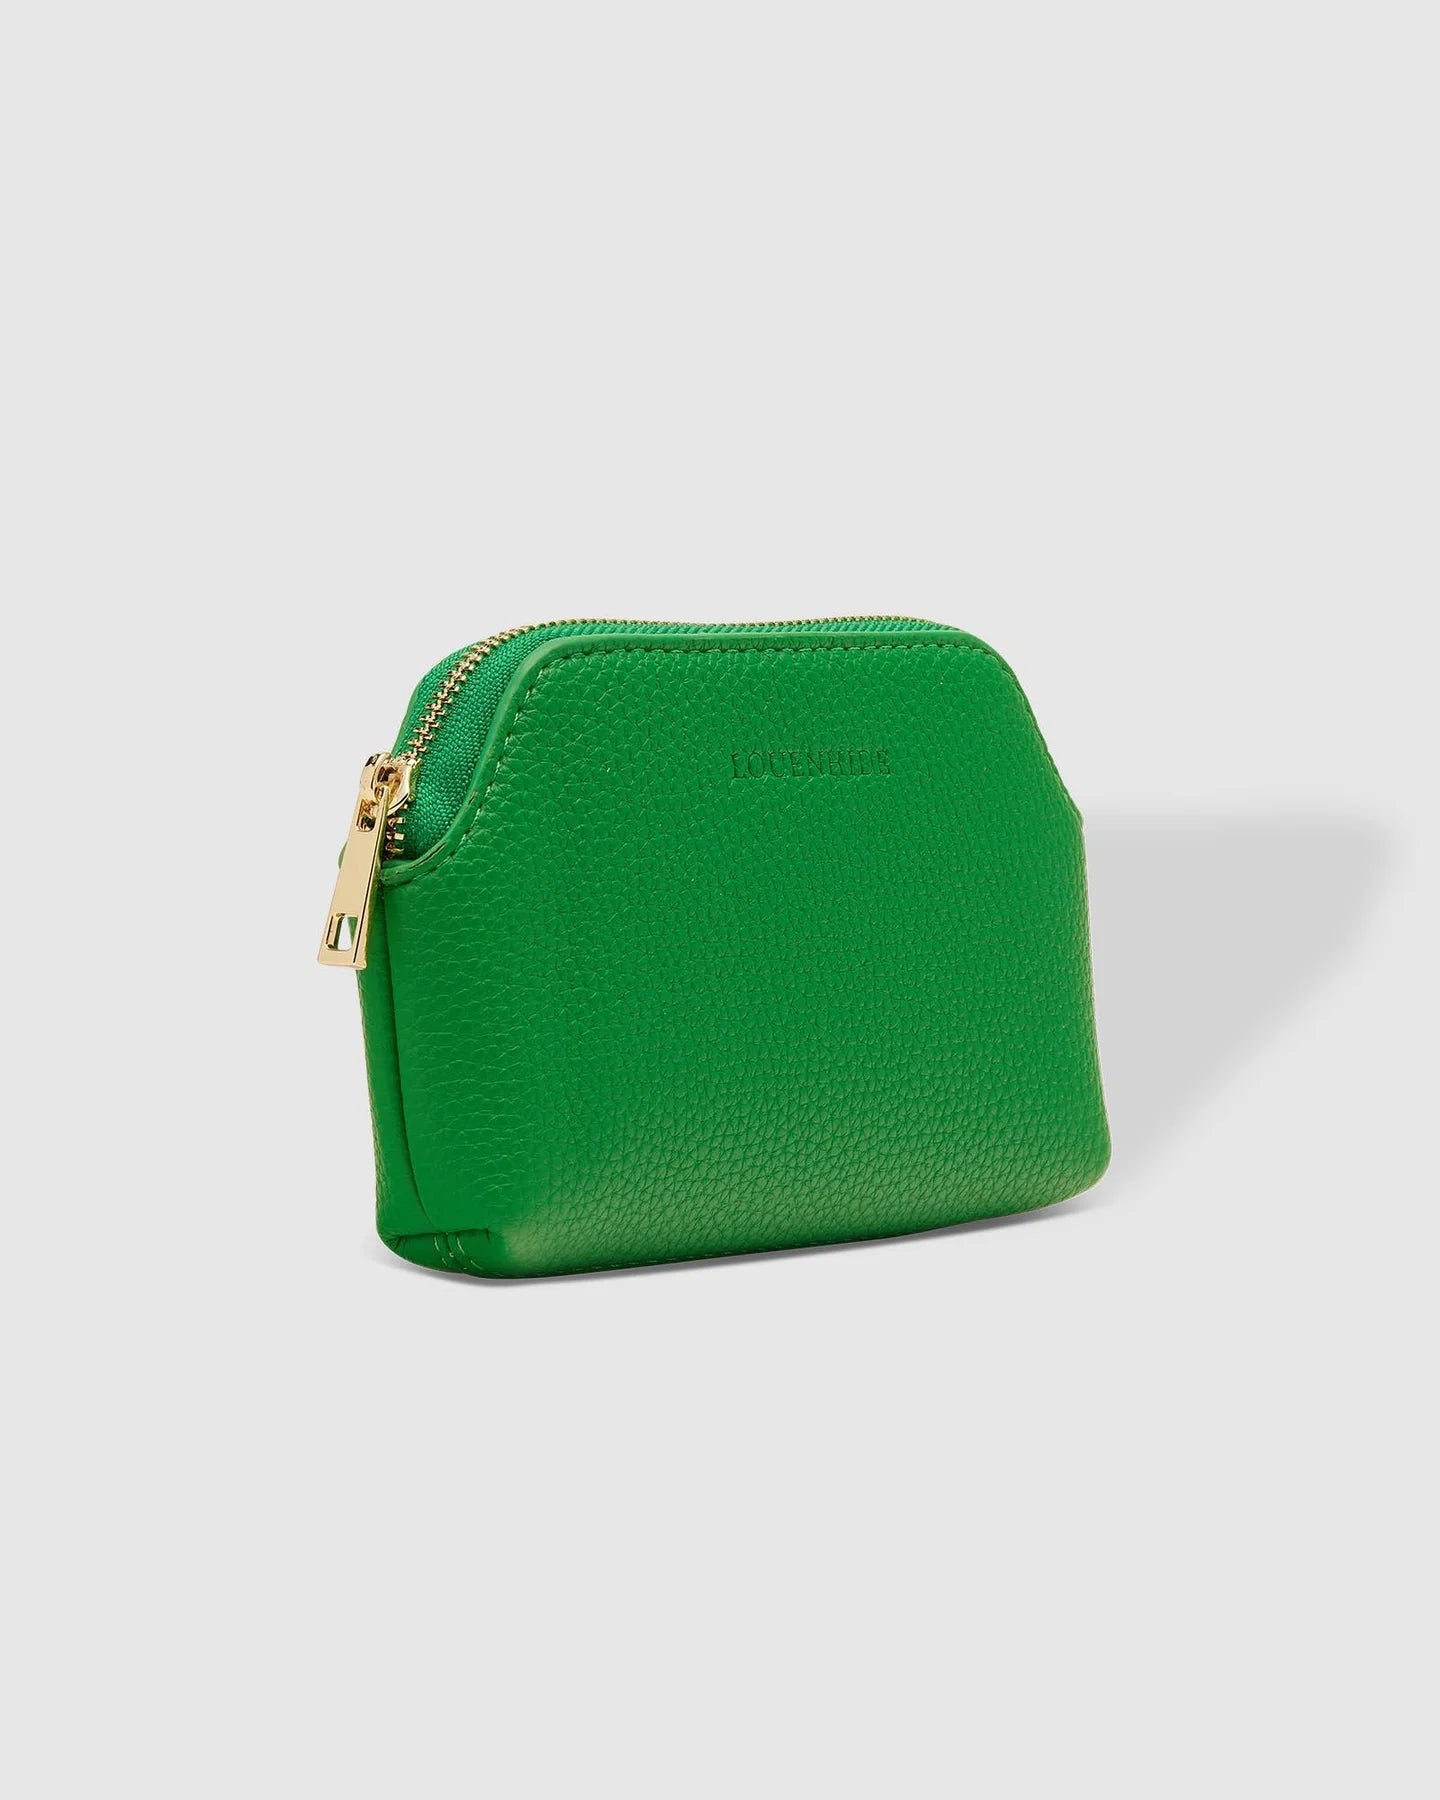 Ruby Purse (Apple Green) - Something For Me​​